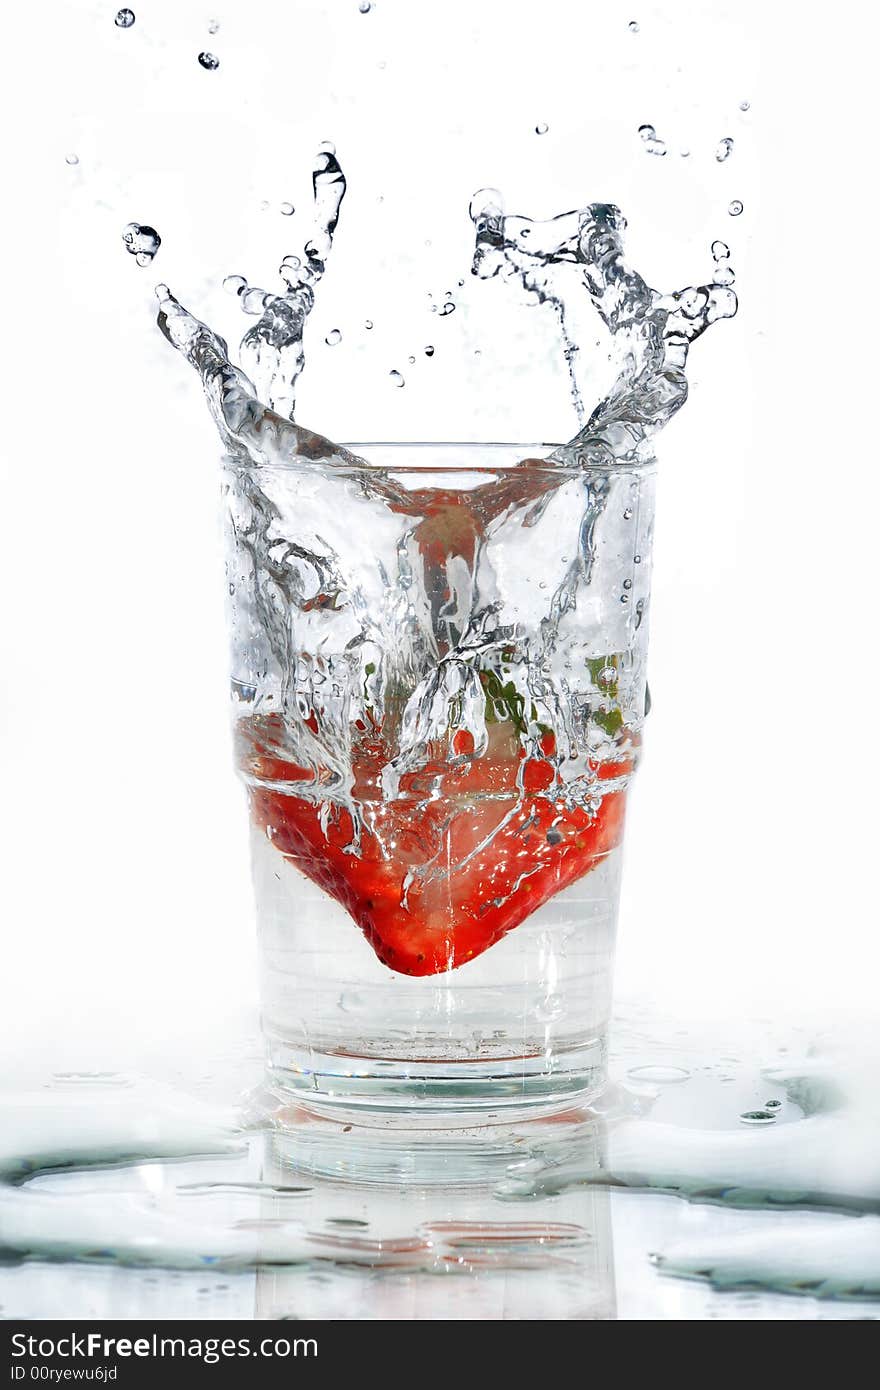 A strawberry making its splash into a glass of water. The water splash taking the shape of the strawberry from the way it enters the water. A strawberry making its splash into a glass of water. The water splash taking the shape of the strawberry from the way it enters the water.